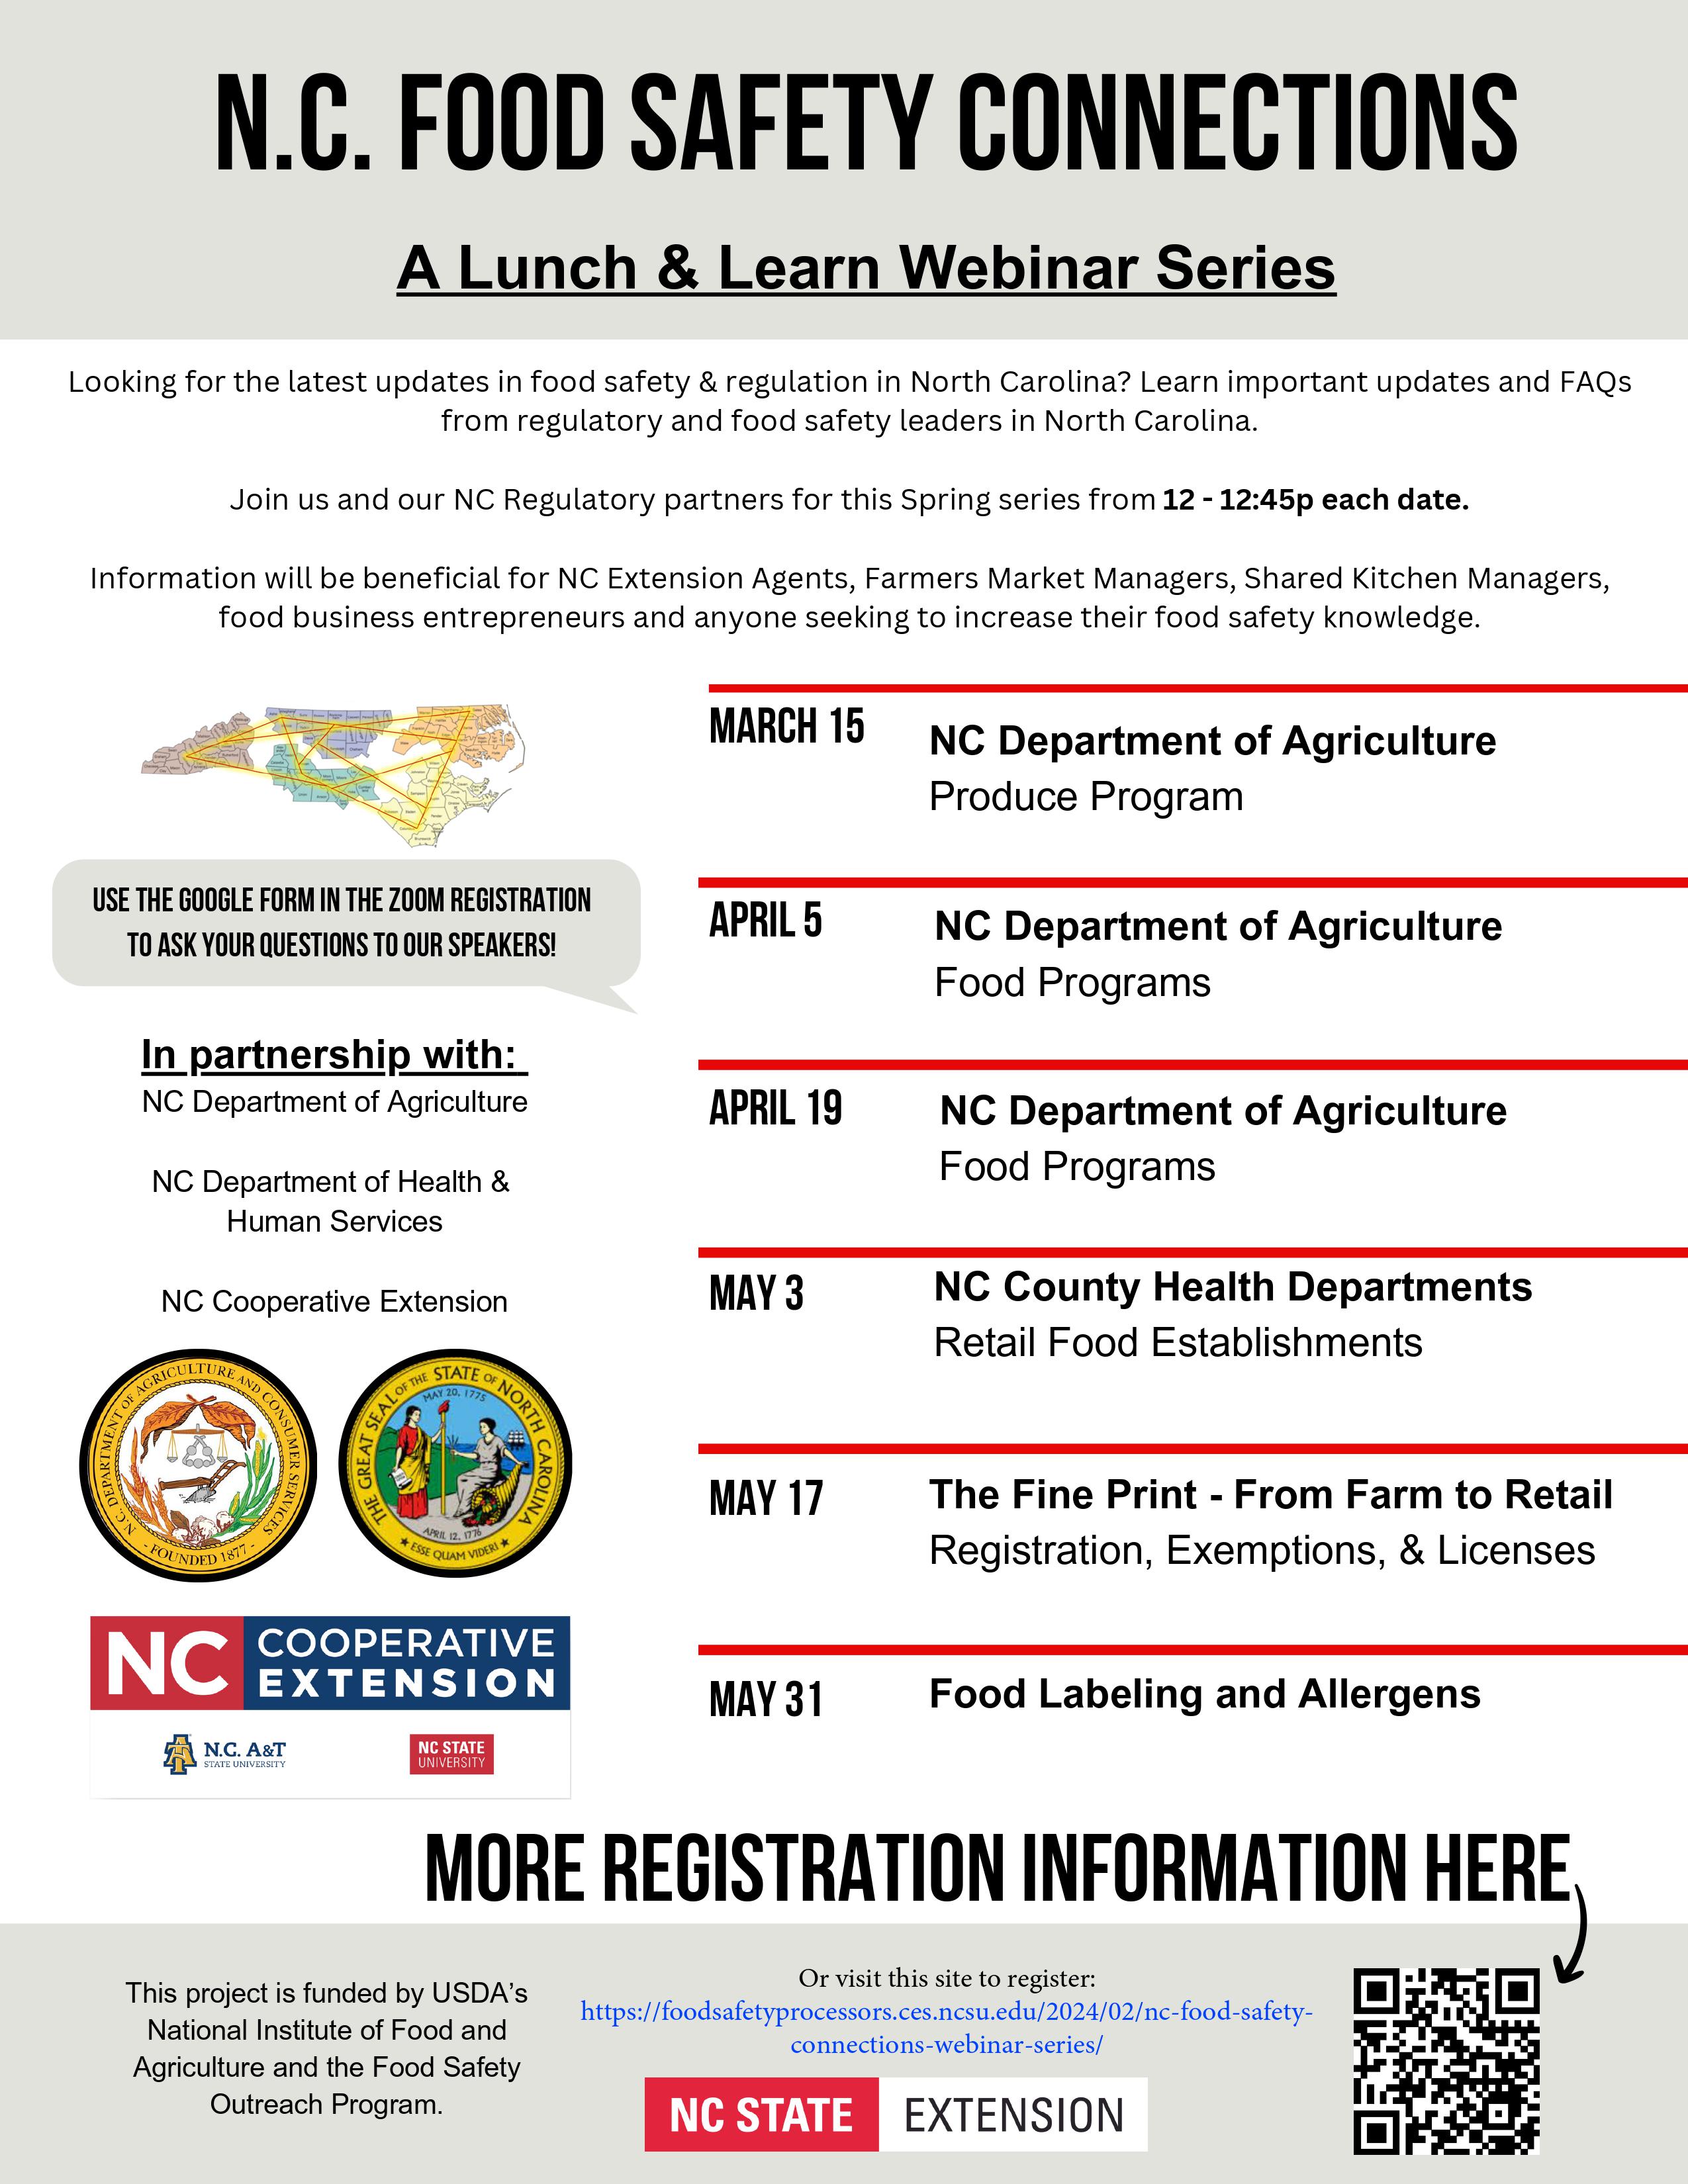 NC Food Safety Connections Webinar Flyer